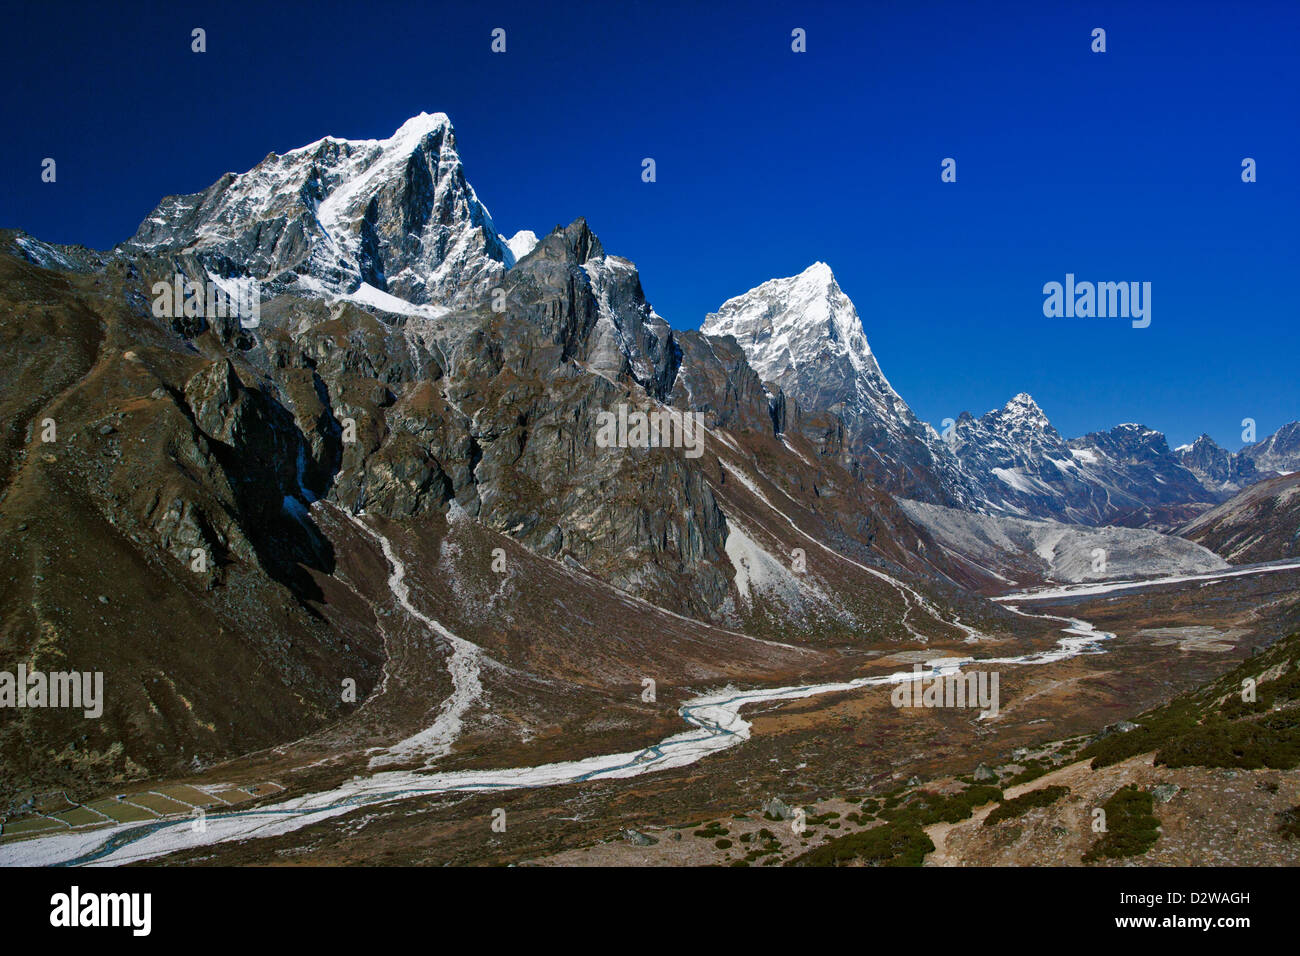 Taboche (6367m) and Cholatse (6335m) peaks in the Chola valley near Dingboche, Nepal. Stock Photo